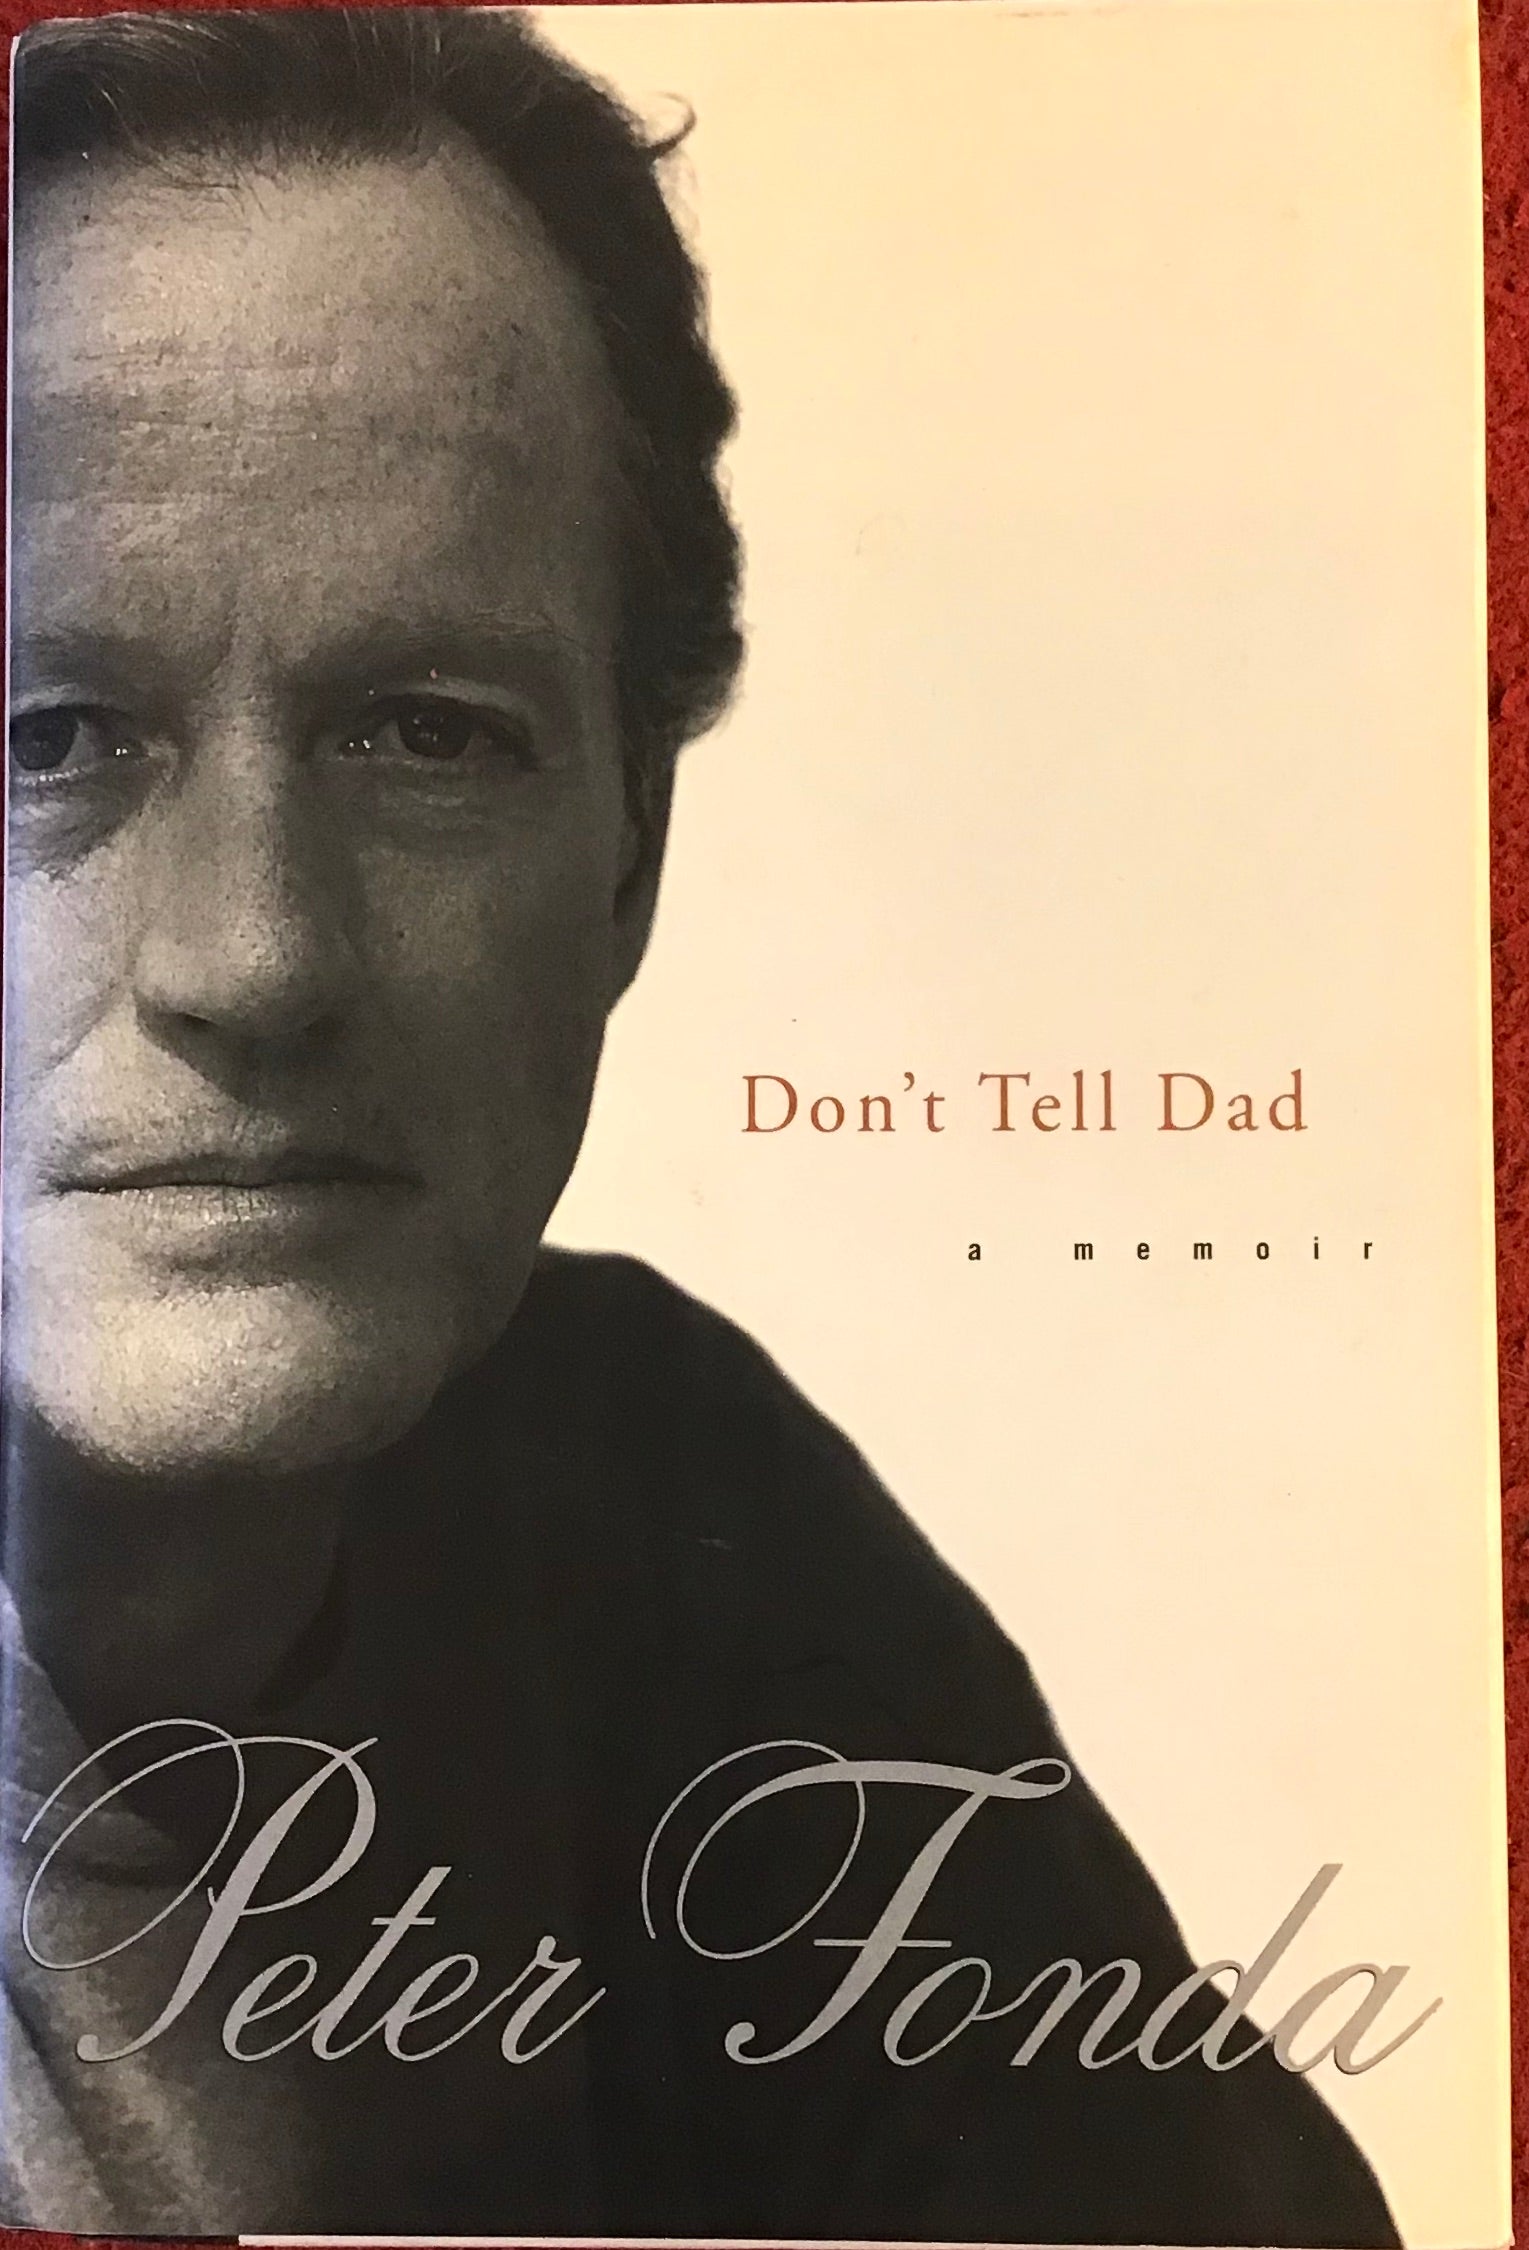 Don't Tell Dad, Peter Fonda, Hyperion, 1998. **SIGNED by Jane Fonda(!)**